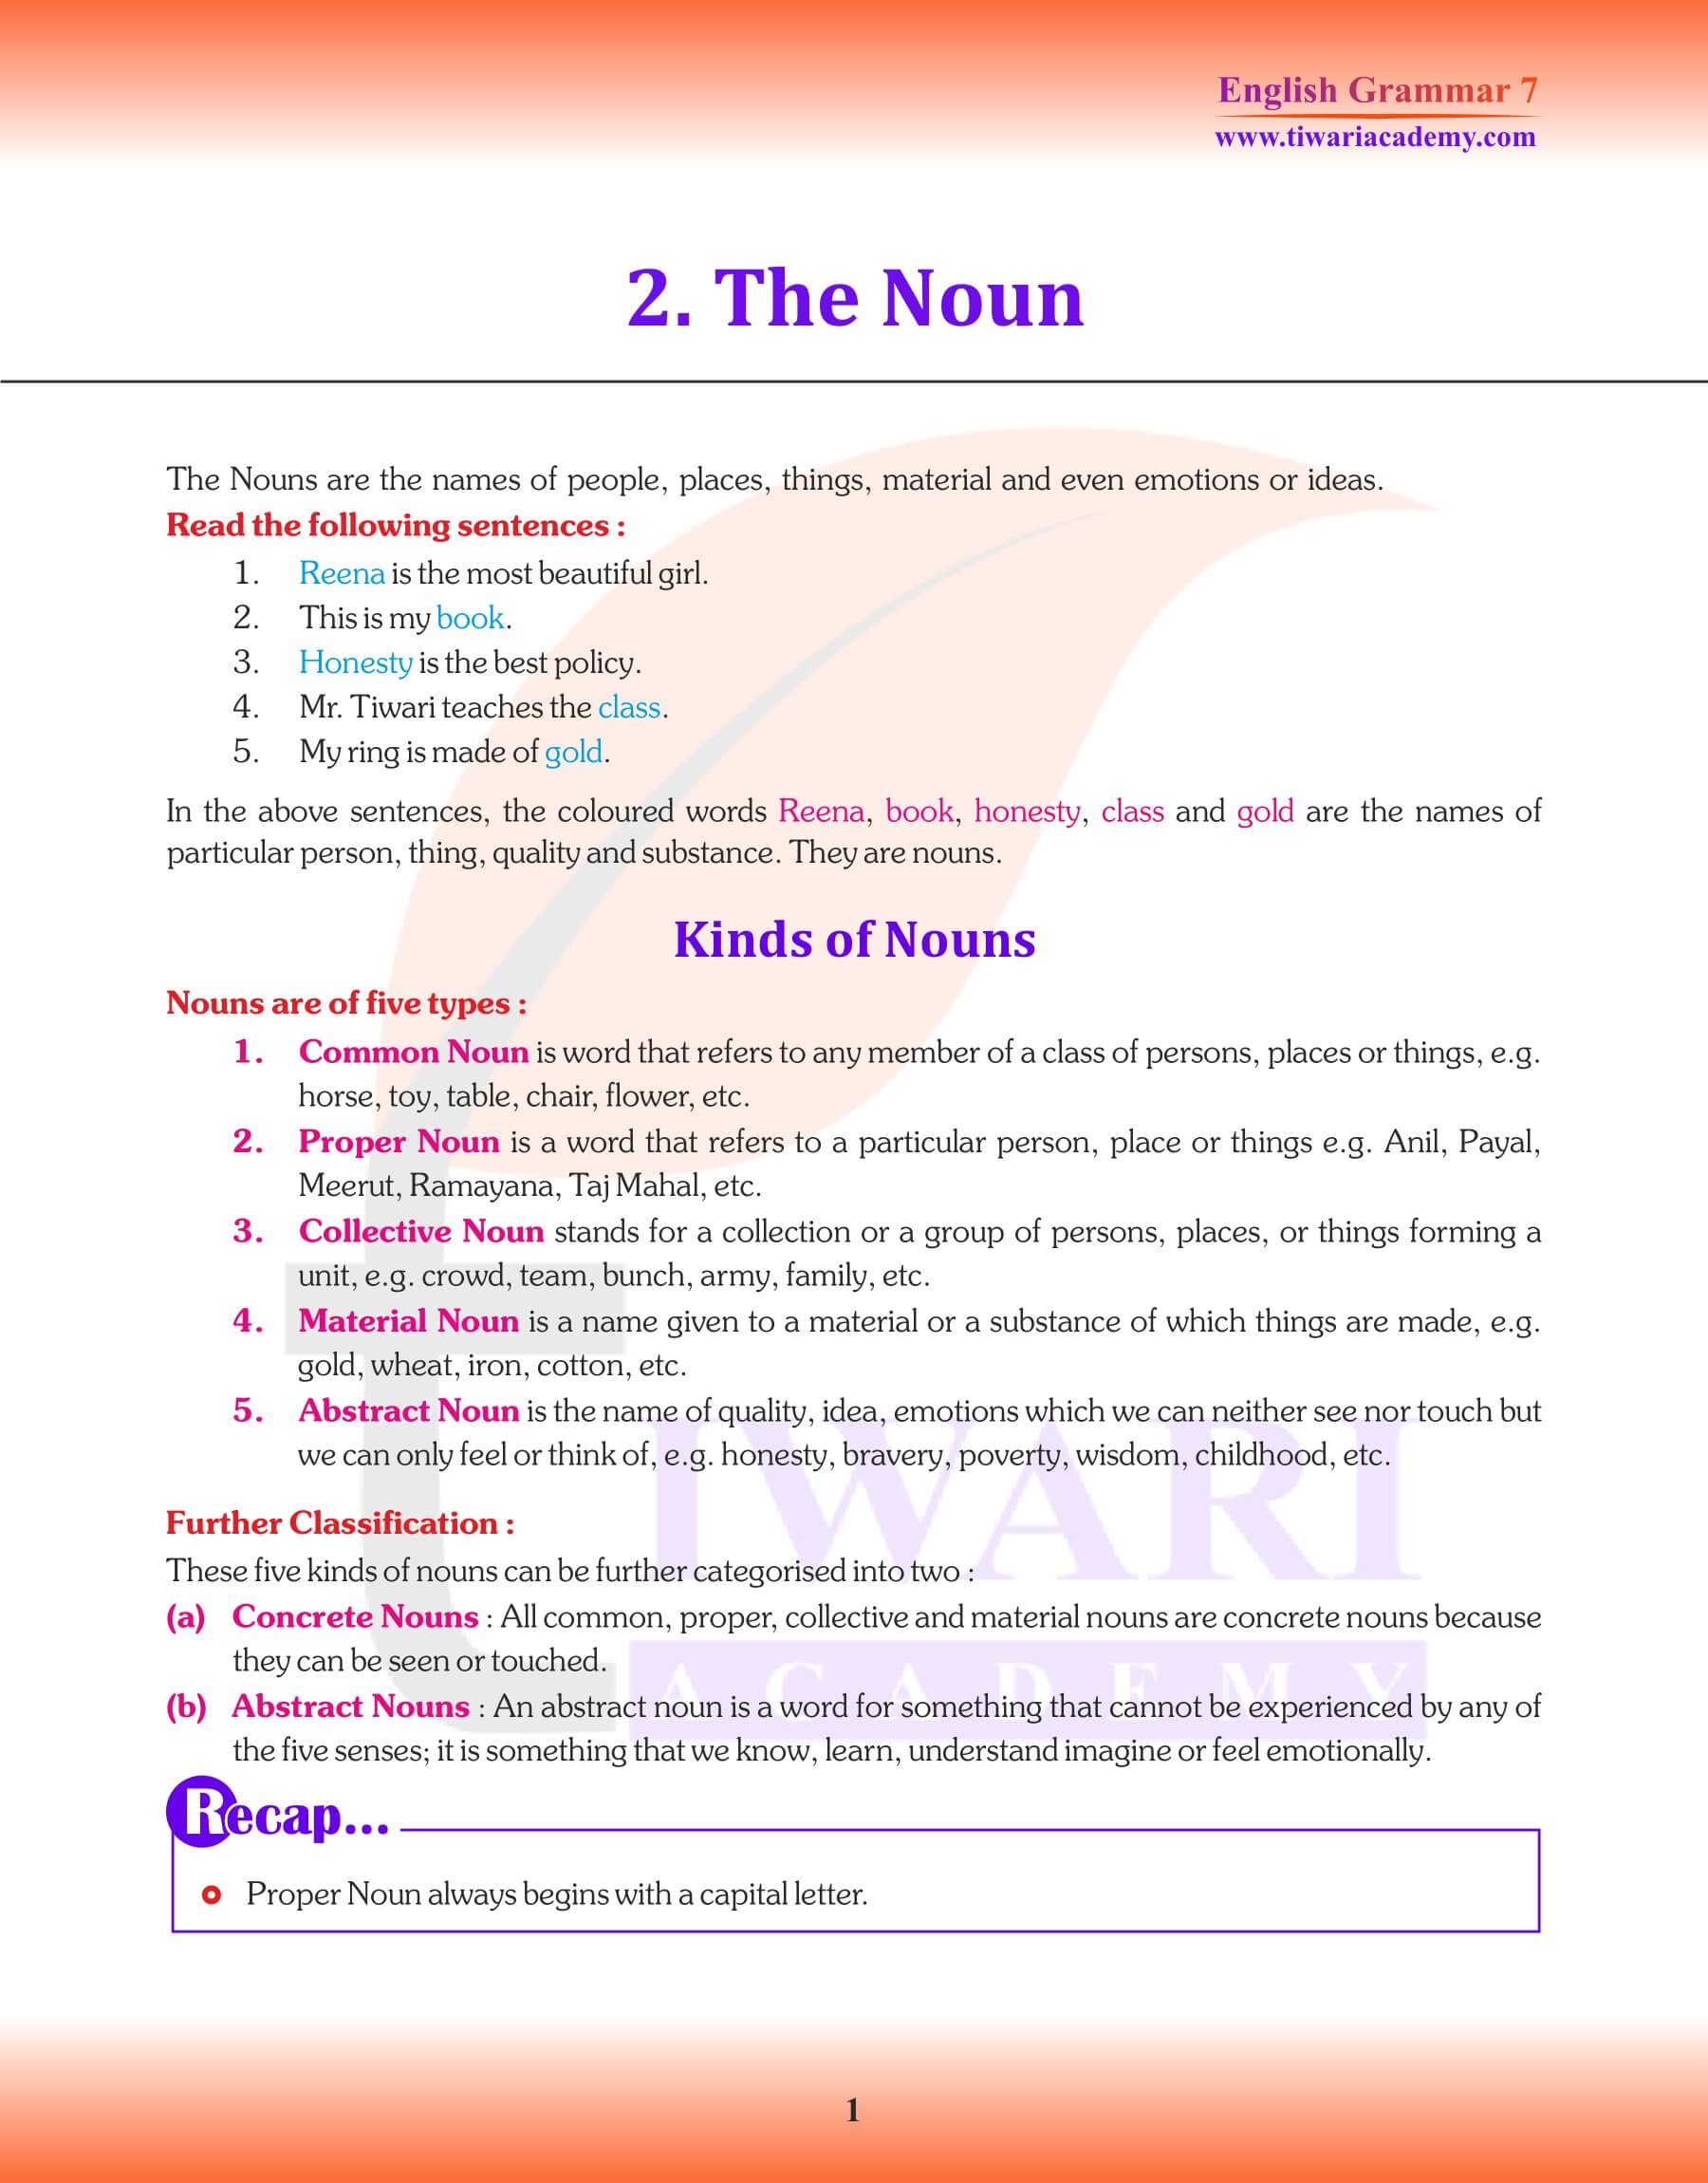 Class 7 English Grammar Chapter 2 Revision